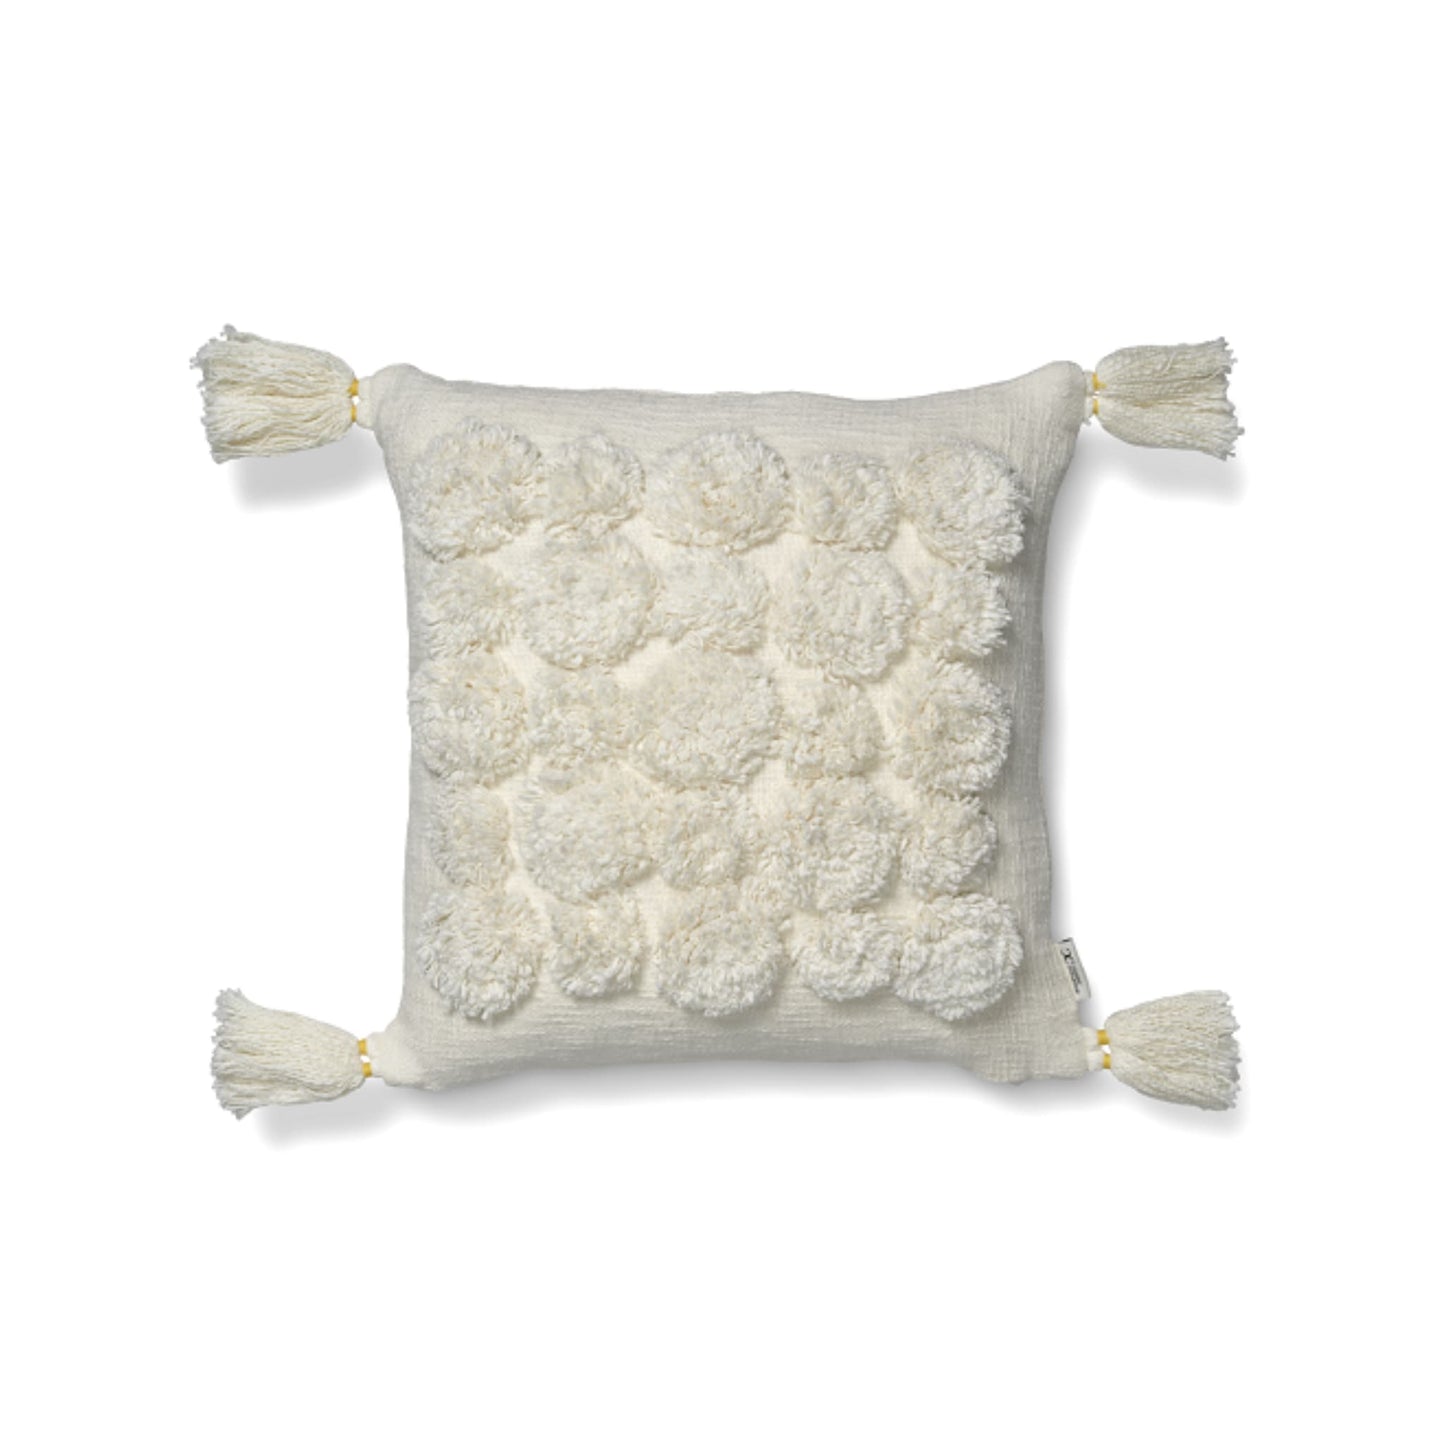 Trysil cushion cover white